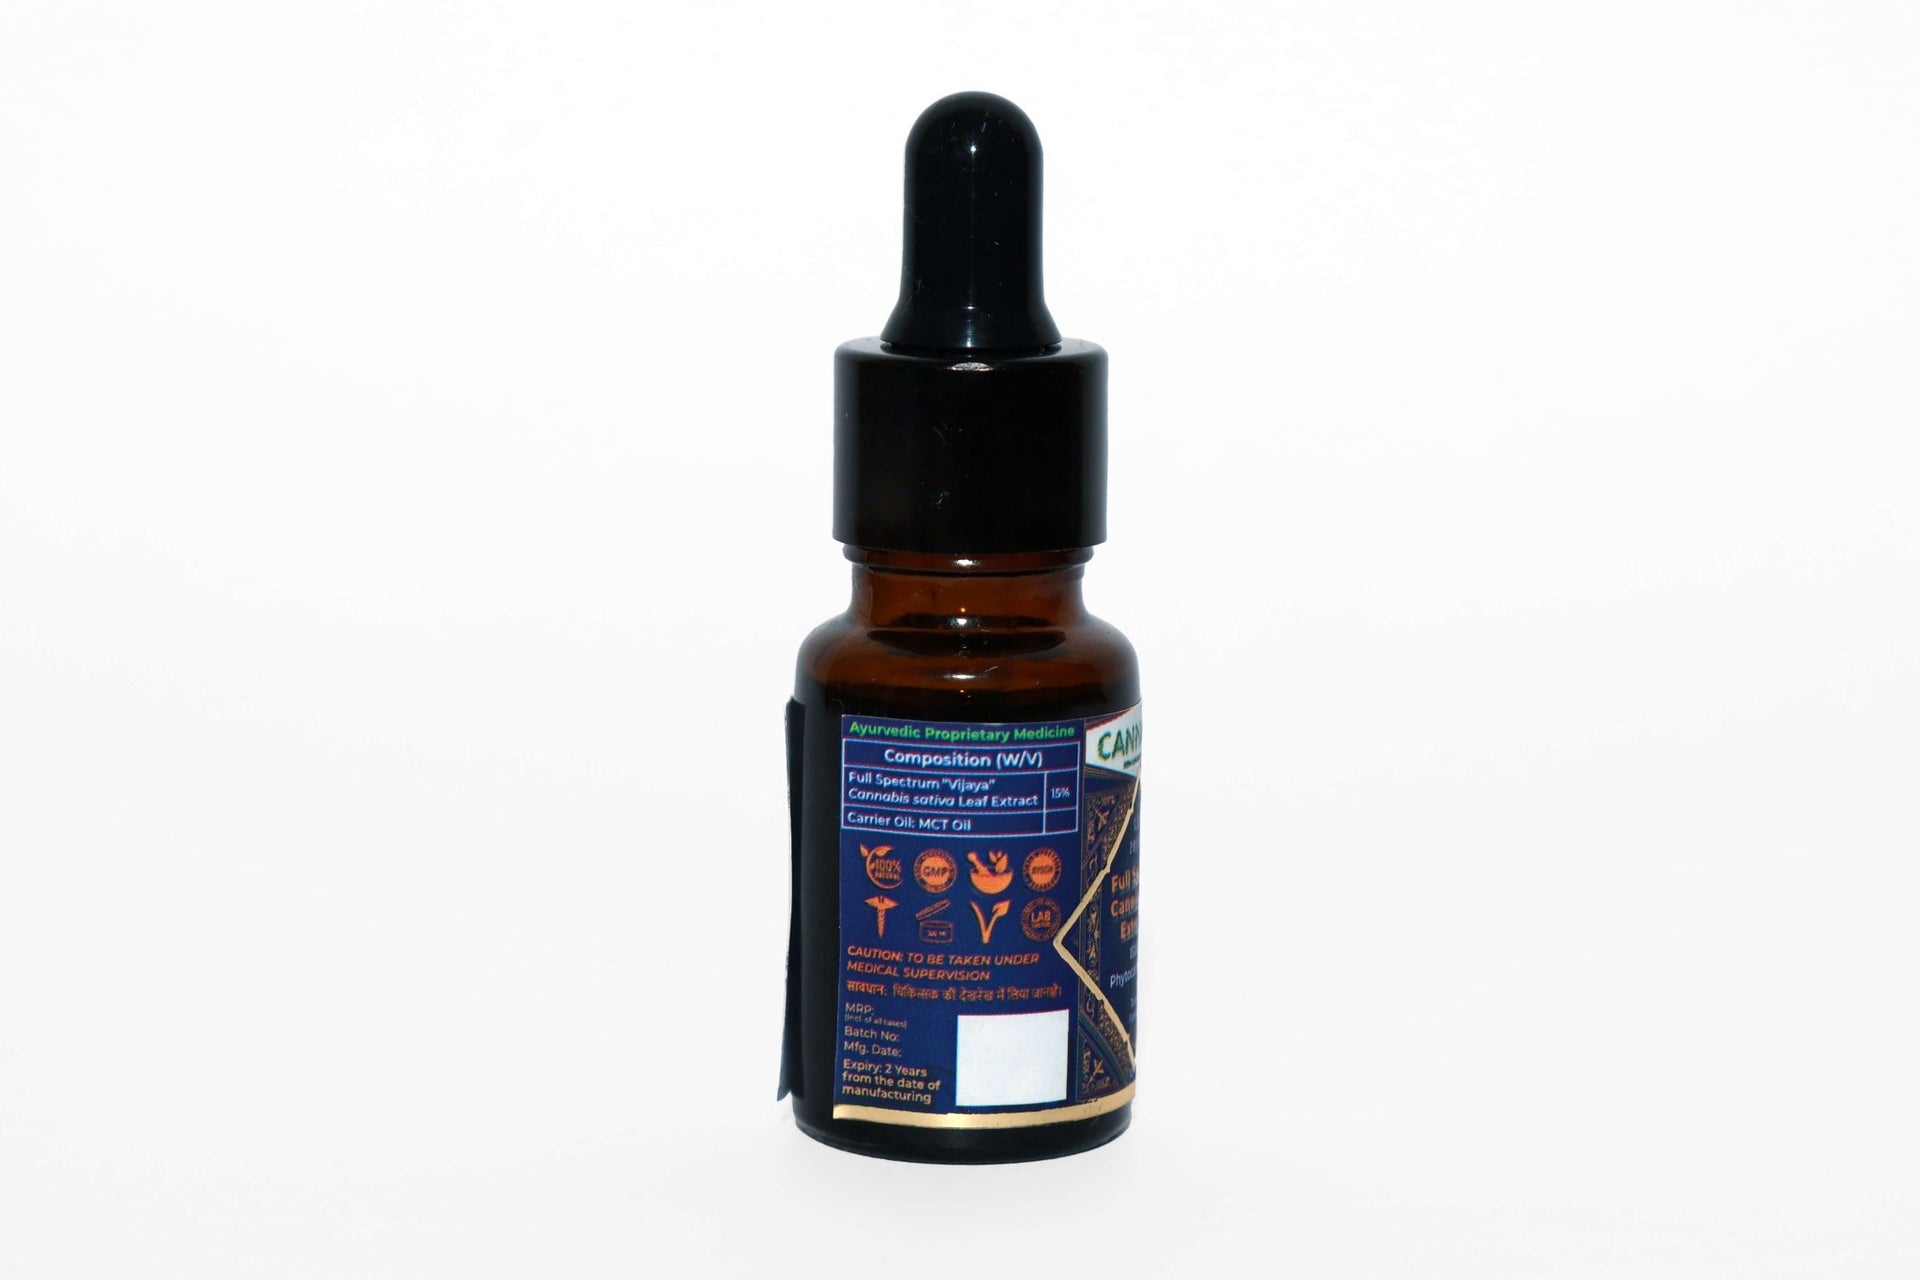 Anandamide Collection - Cannarma™ Ultra premium Full Spectrum Cannabis Leaf Extract Oil 10ml 15% (1500mg) - CBD Store India